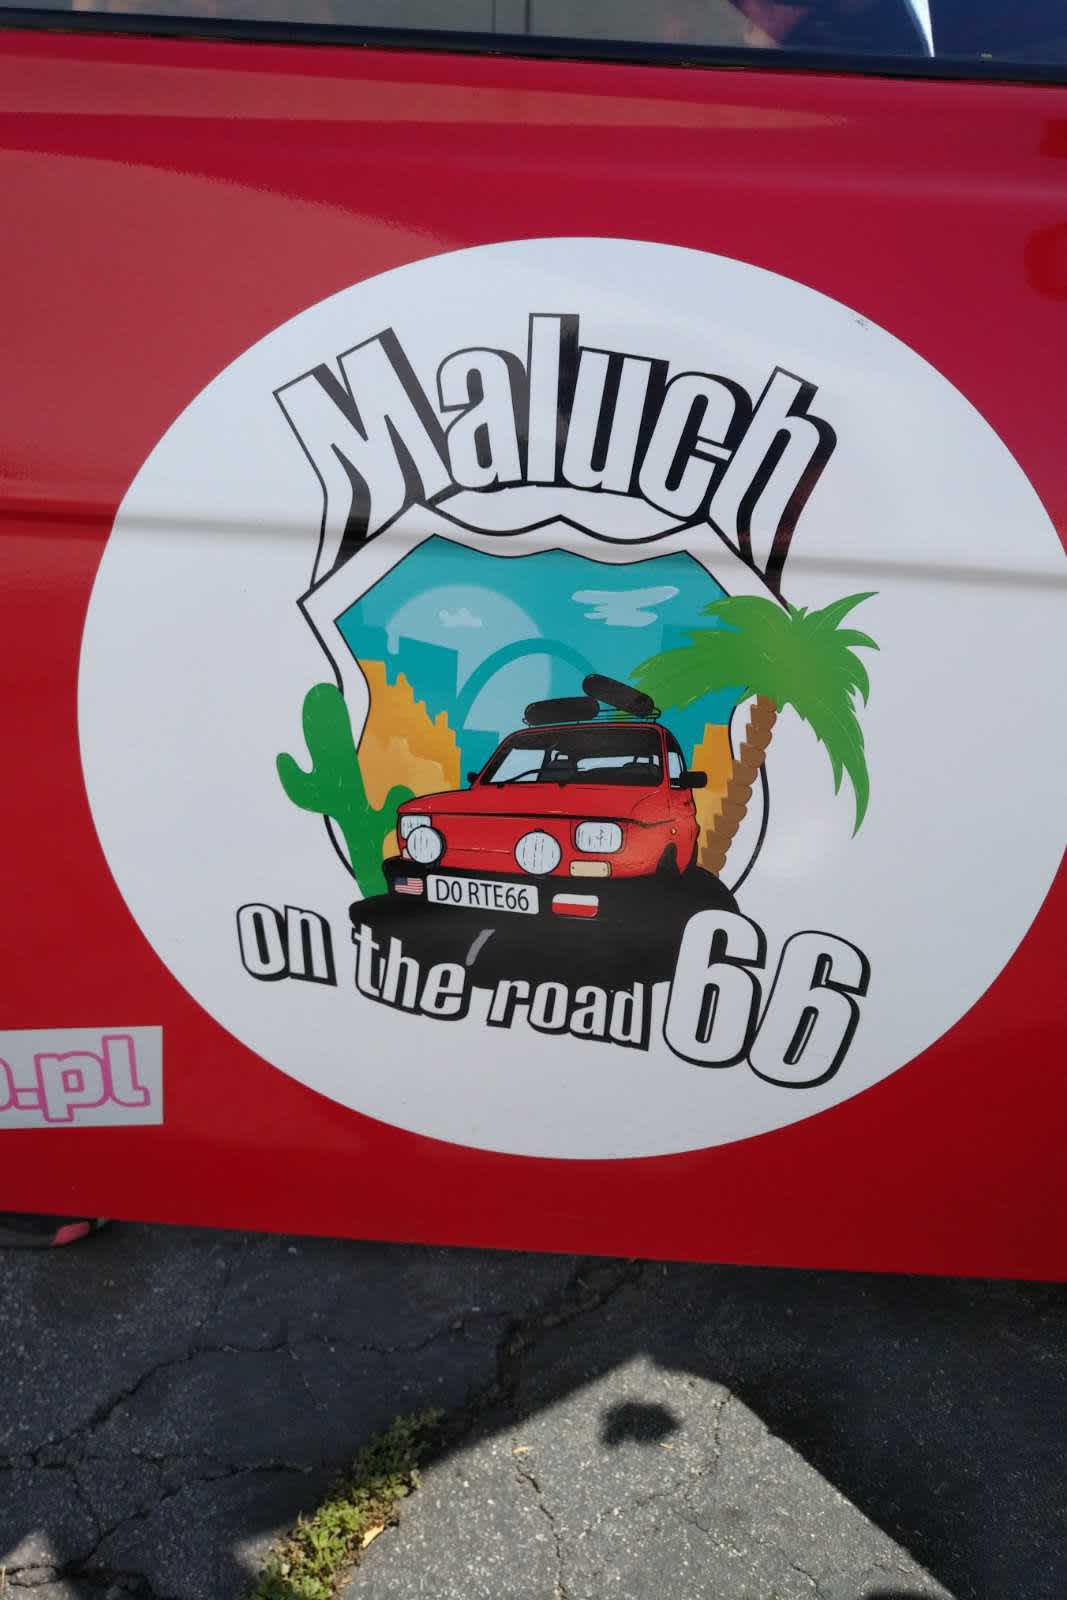 Maluch on the road 66